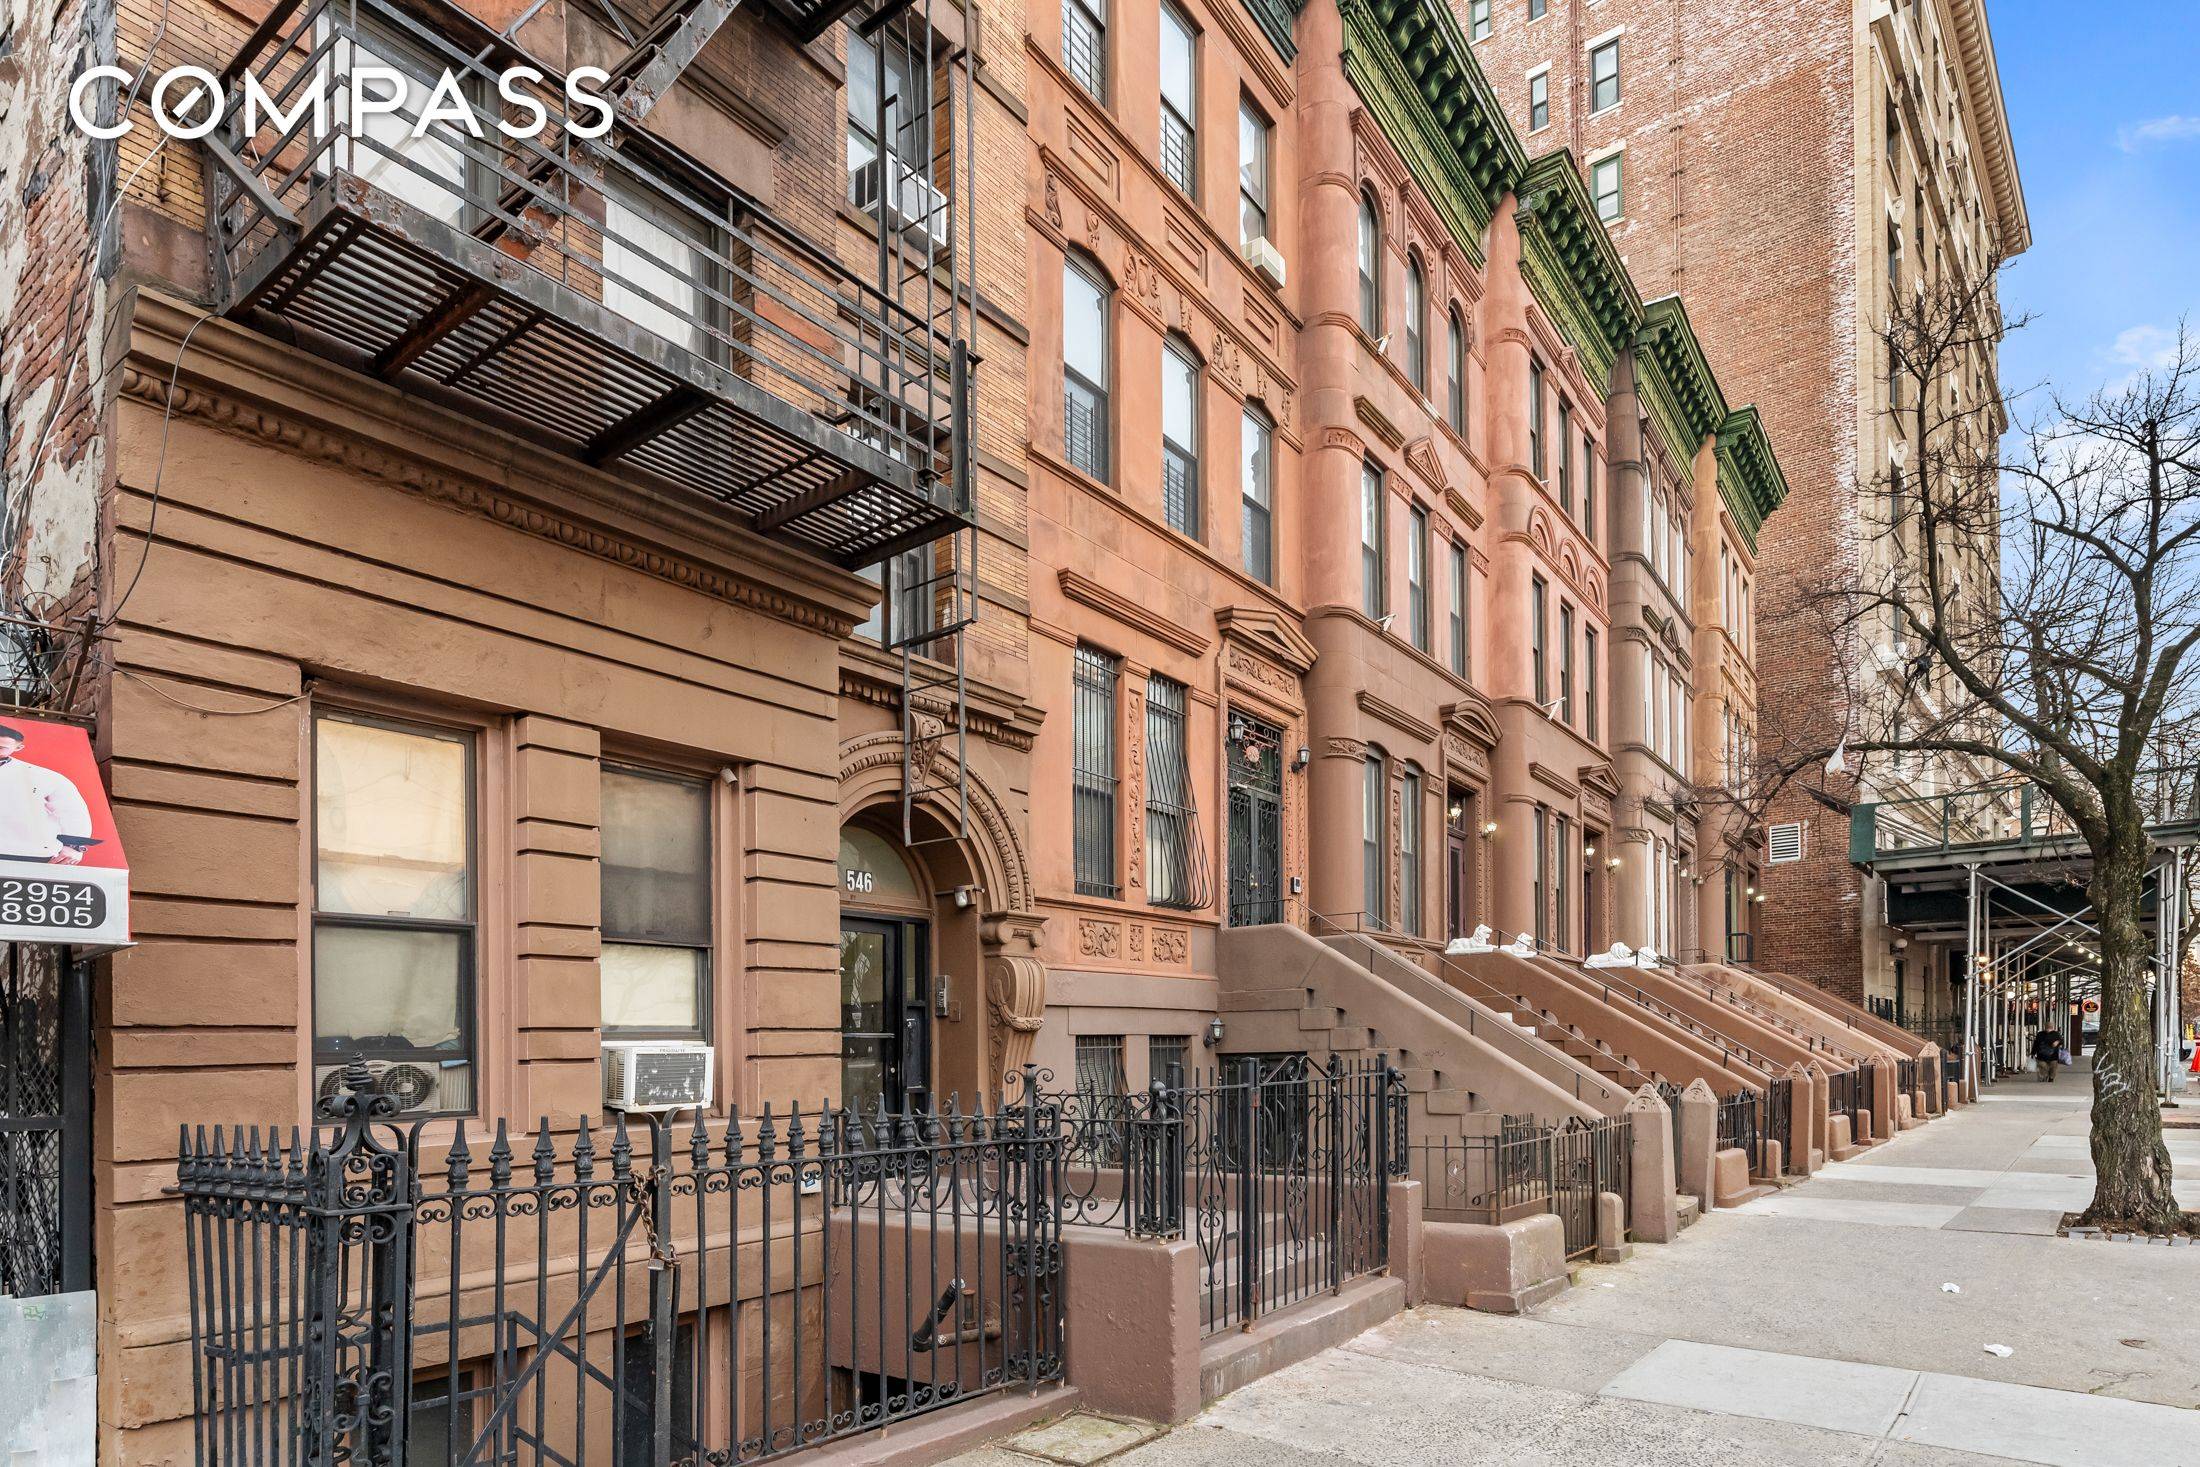 Welcome to 546 West 165th Street, a well maintained 5 unit multi family brownstone nestled in the heart of Washington Heights.